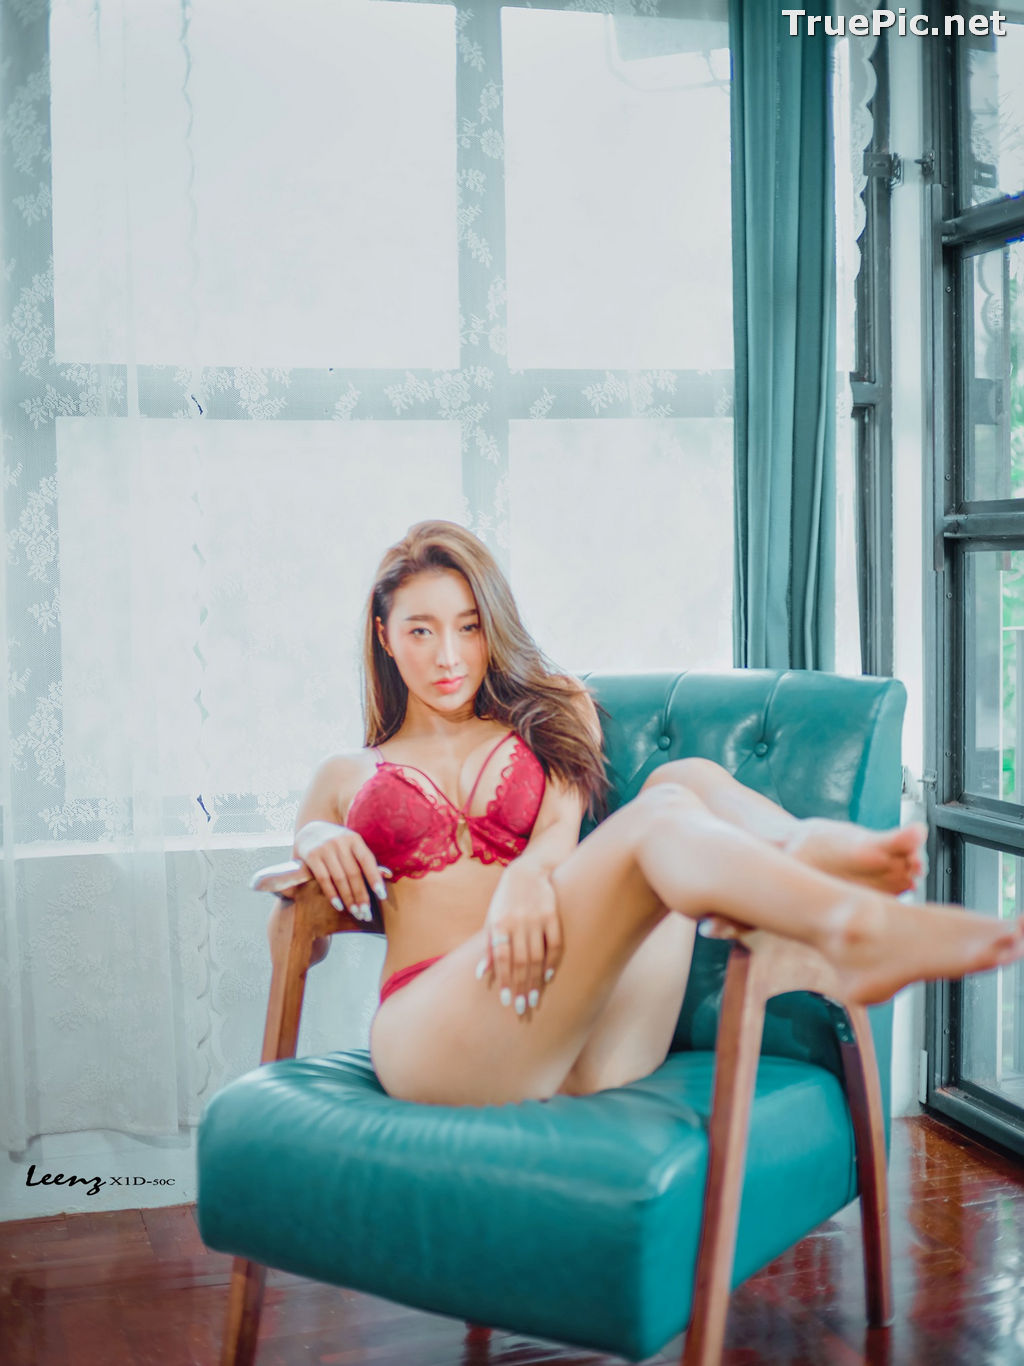 Image Thailand Model - Namthip Chacov - Sexy Lingerie For You - TruePic.net - Picture-29